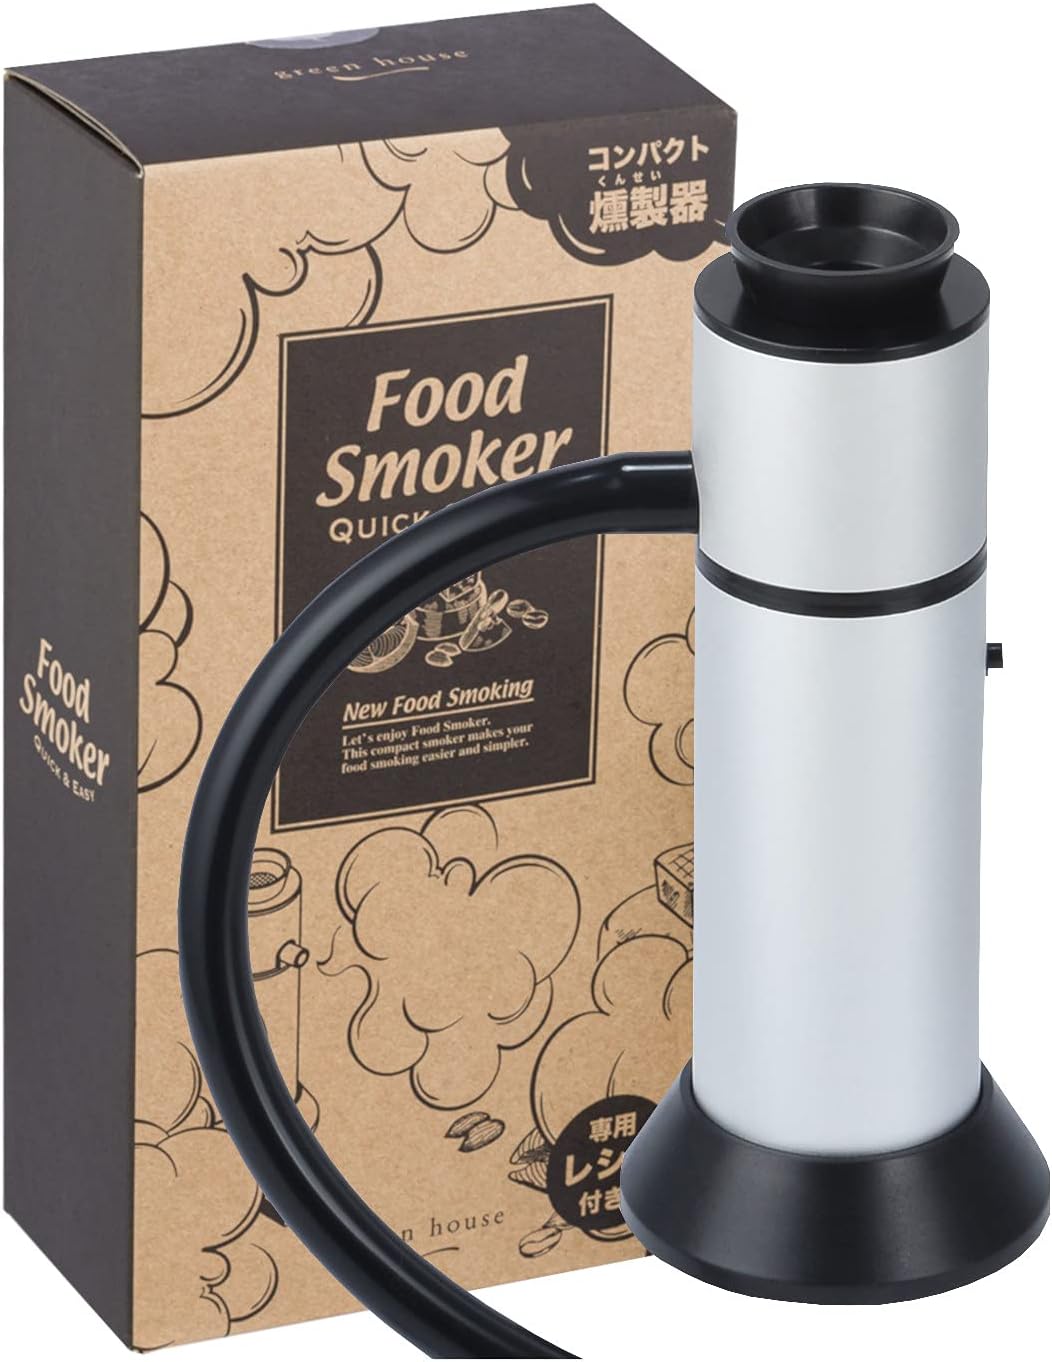 GREENHOUSE PORTABLE FOOD SMOKER. SMOKING GUN MINI-Compact size for outdoor & at home. Add strong smoky flavor to cocktail, turkey, cheese etc. Recommend as awesome gift for smoker food lovers.